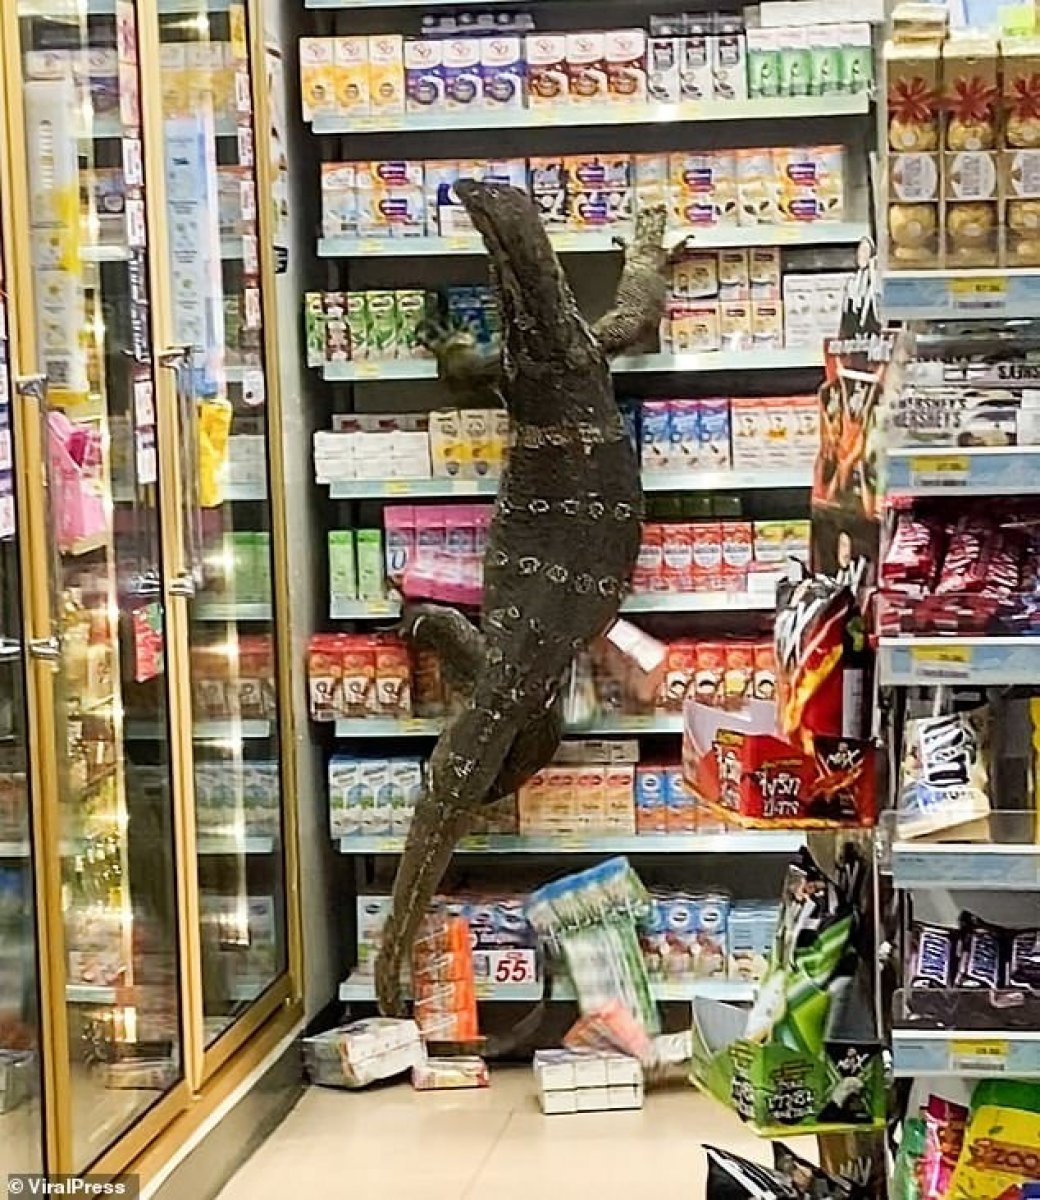 Giant lizard entered the market in Thailand #1